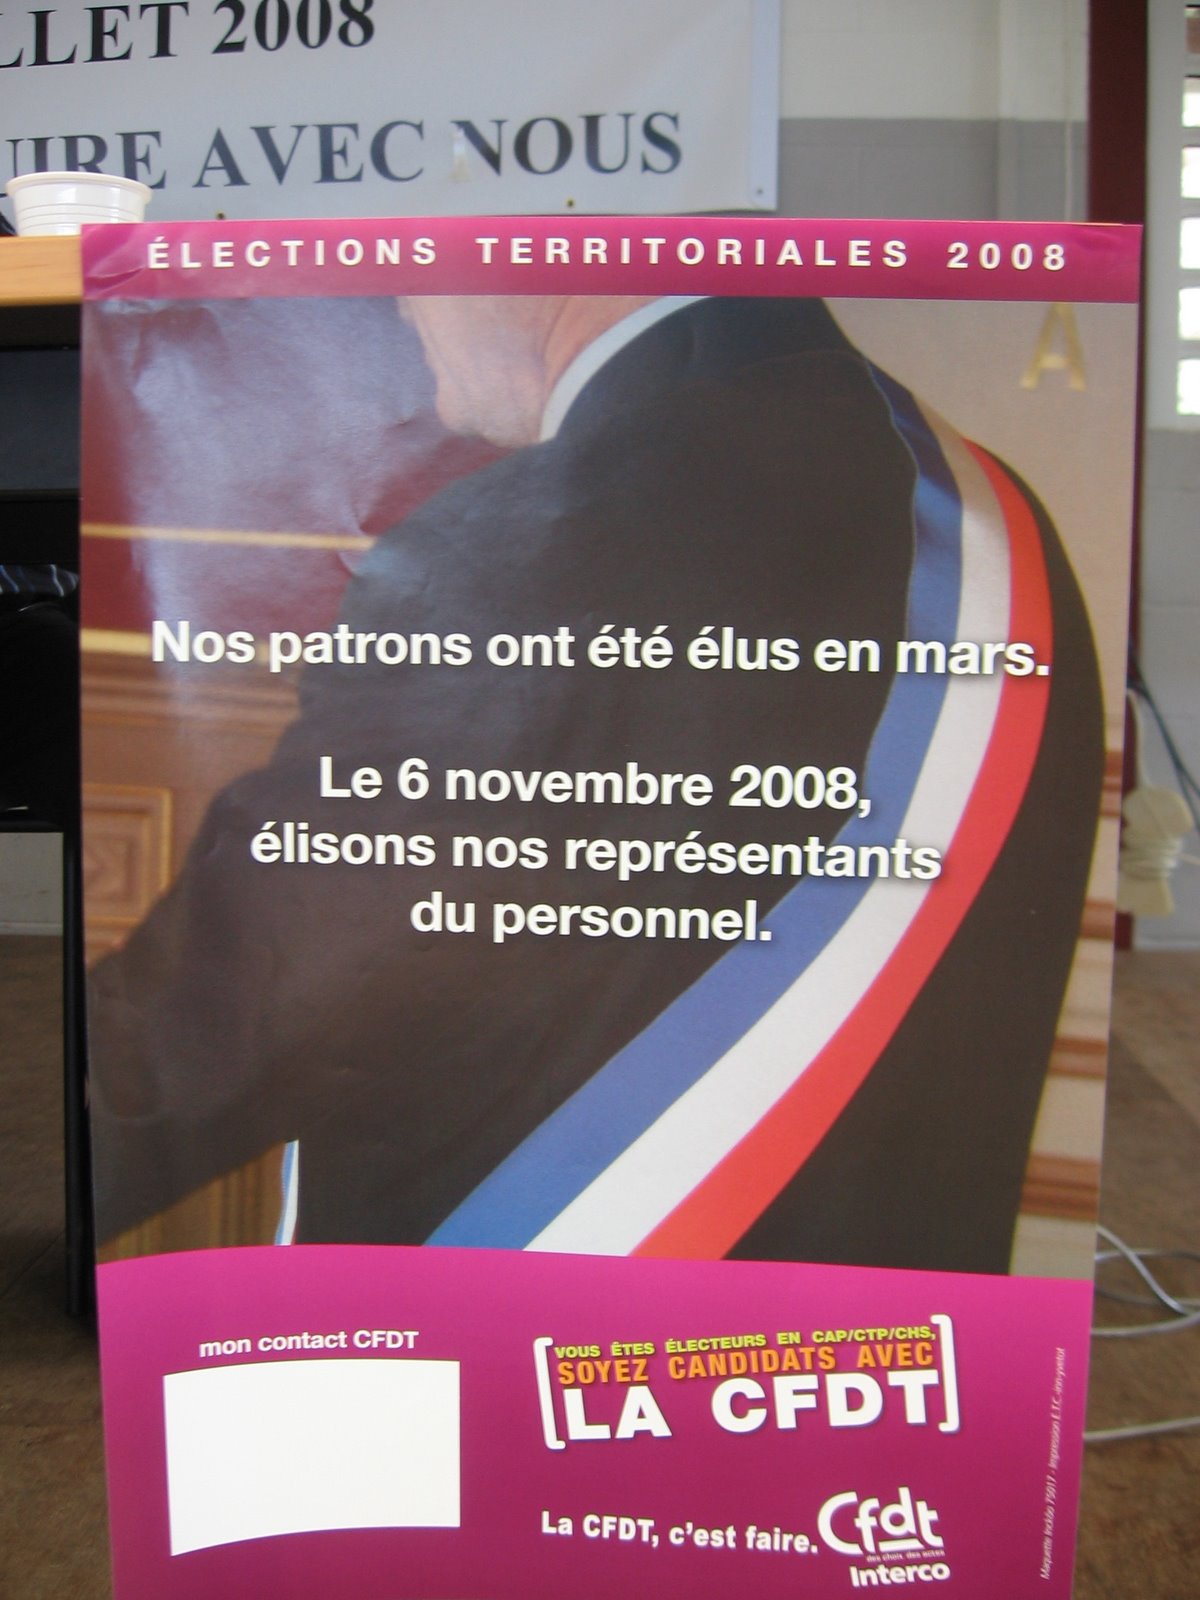 [Affiche+ELECTIONS.JPG]